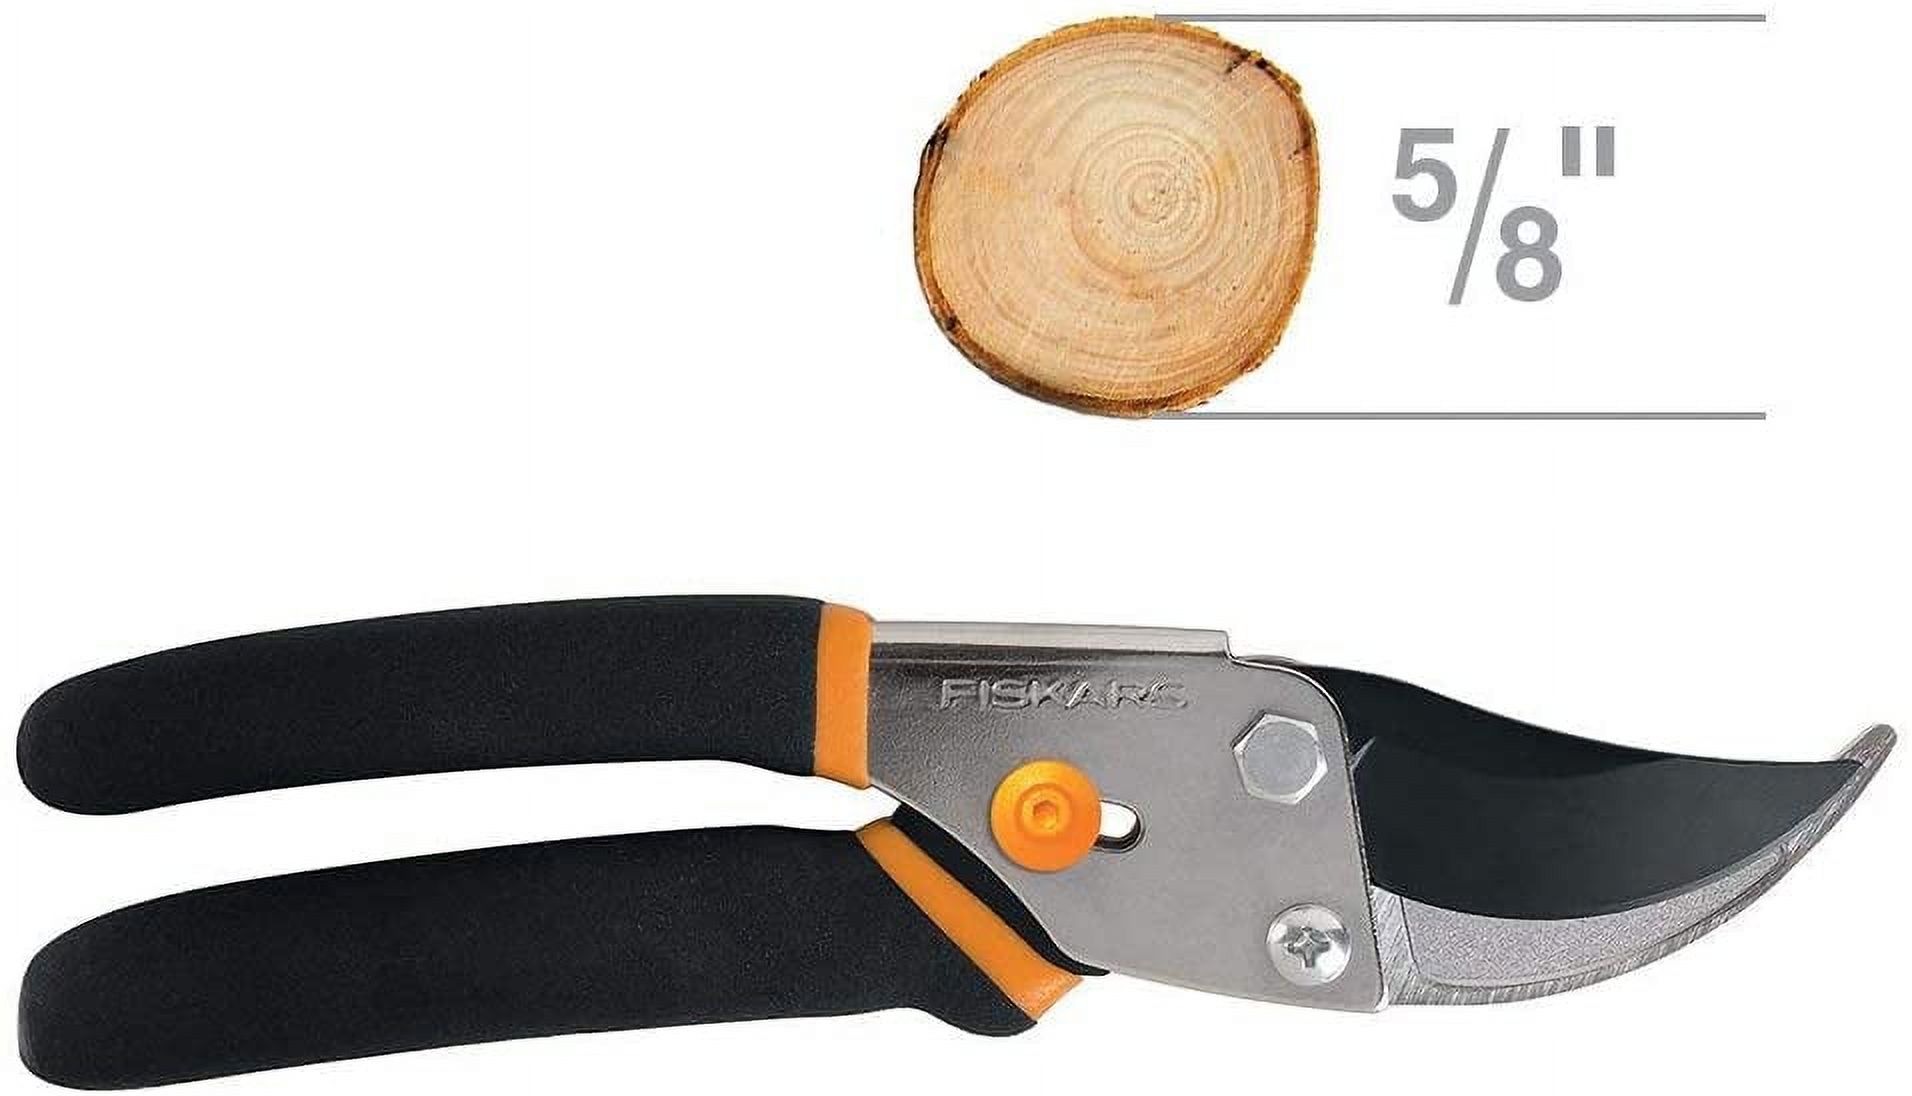 Fiskars Bypass Pruning Shears Garden Tool with Steel Blade - image 3 of 4